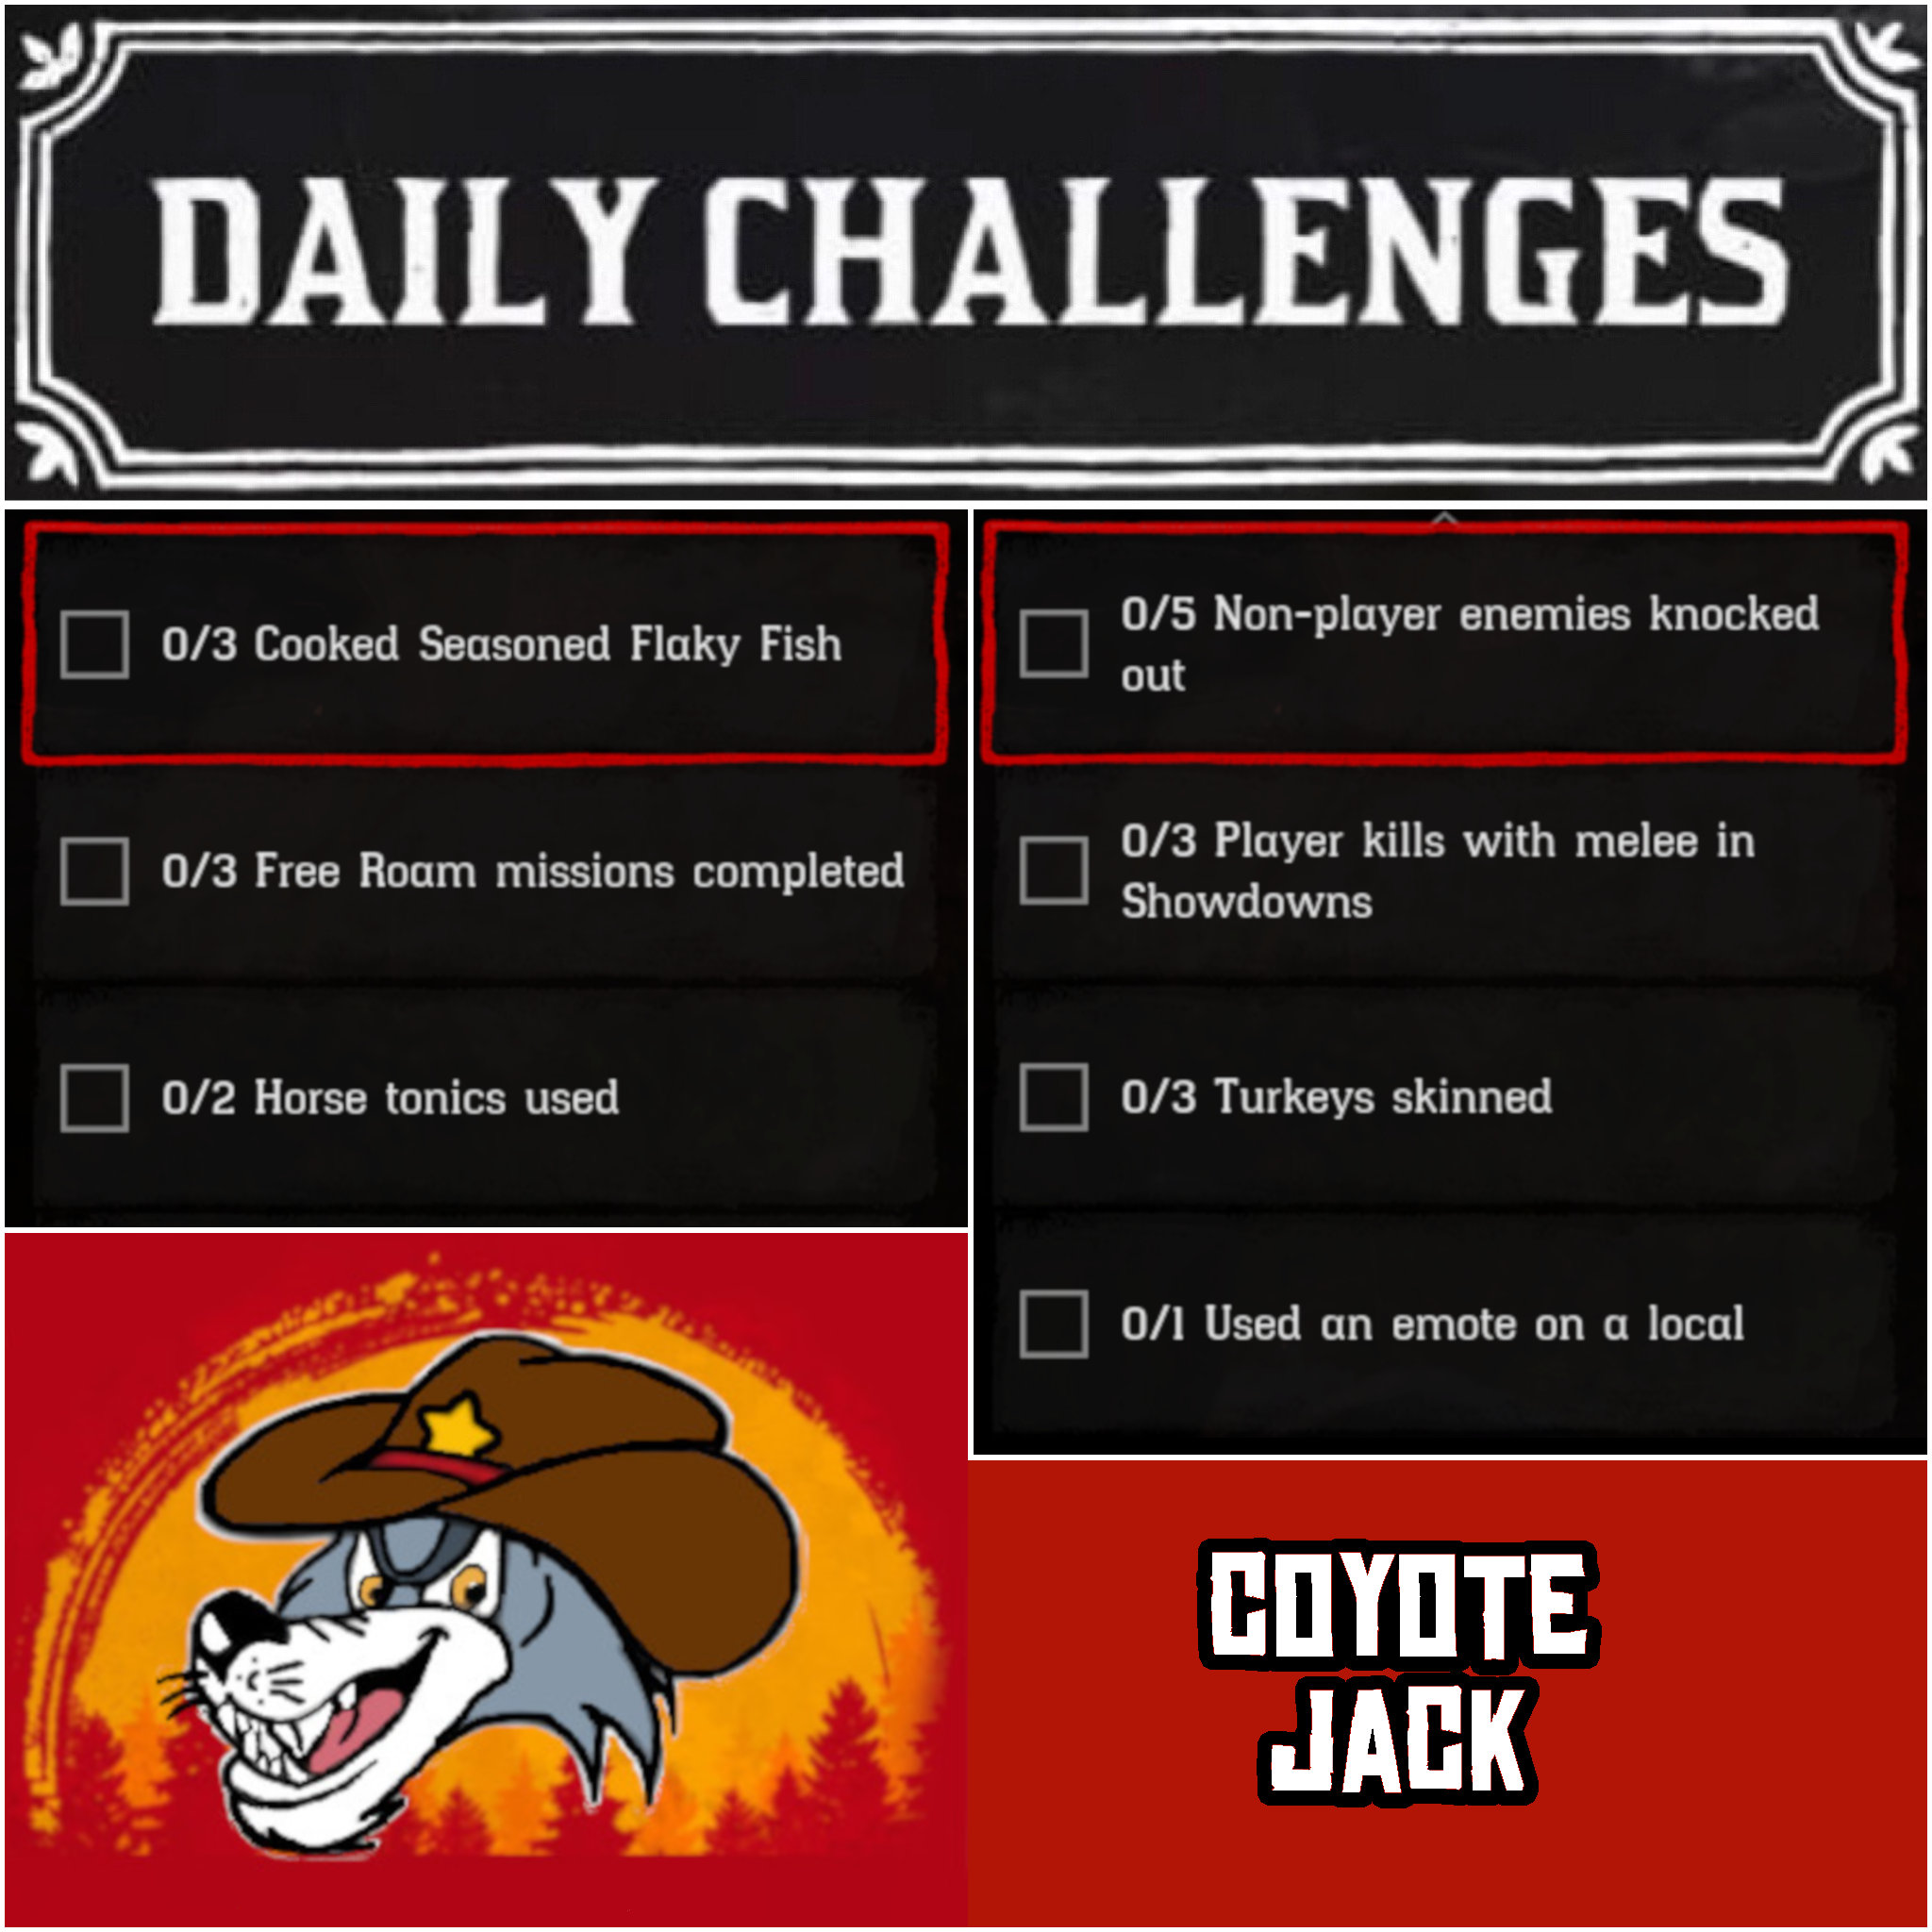 You are currently viewing Thursday 10 December Daily Challenges